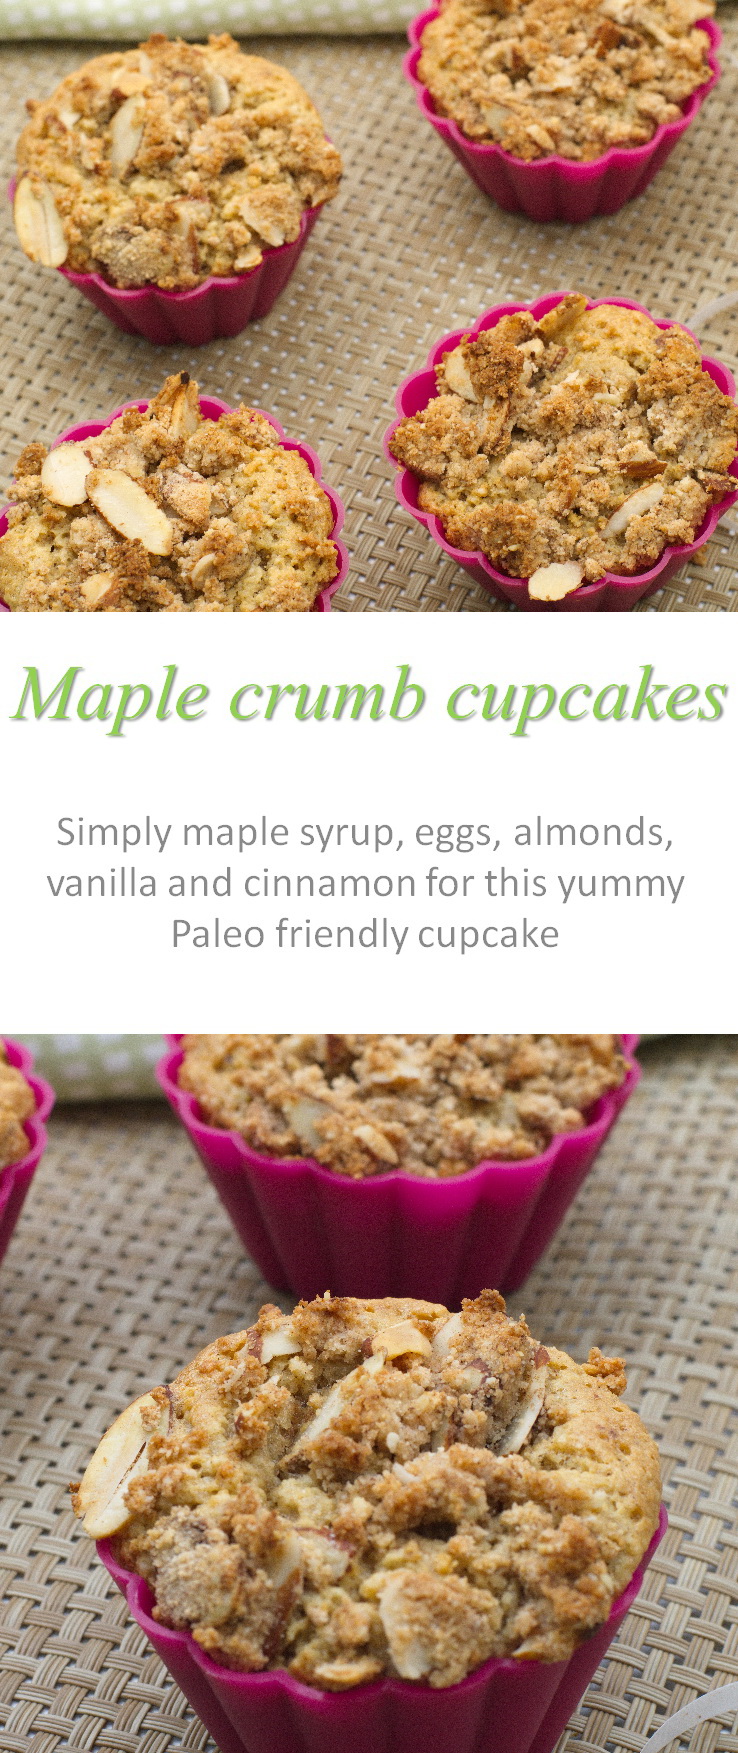 A moist and Paleo-friendly maple crumb cupcake, using simple ingredients such as maple syrup, almond meal and eggs to get your tastebuds dancing #cupcakes